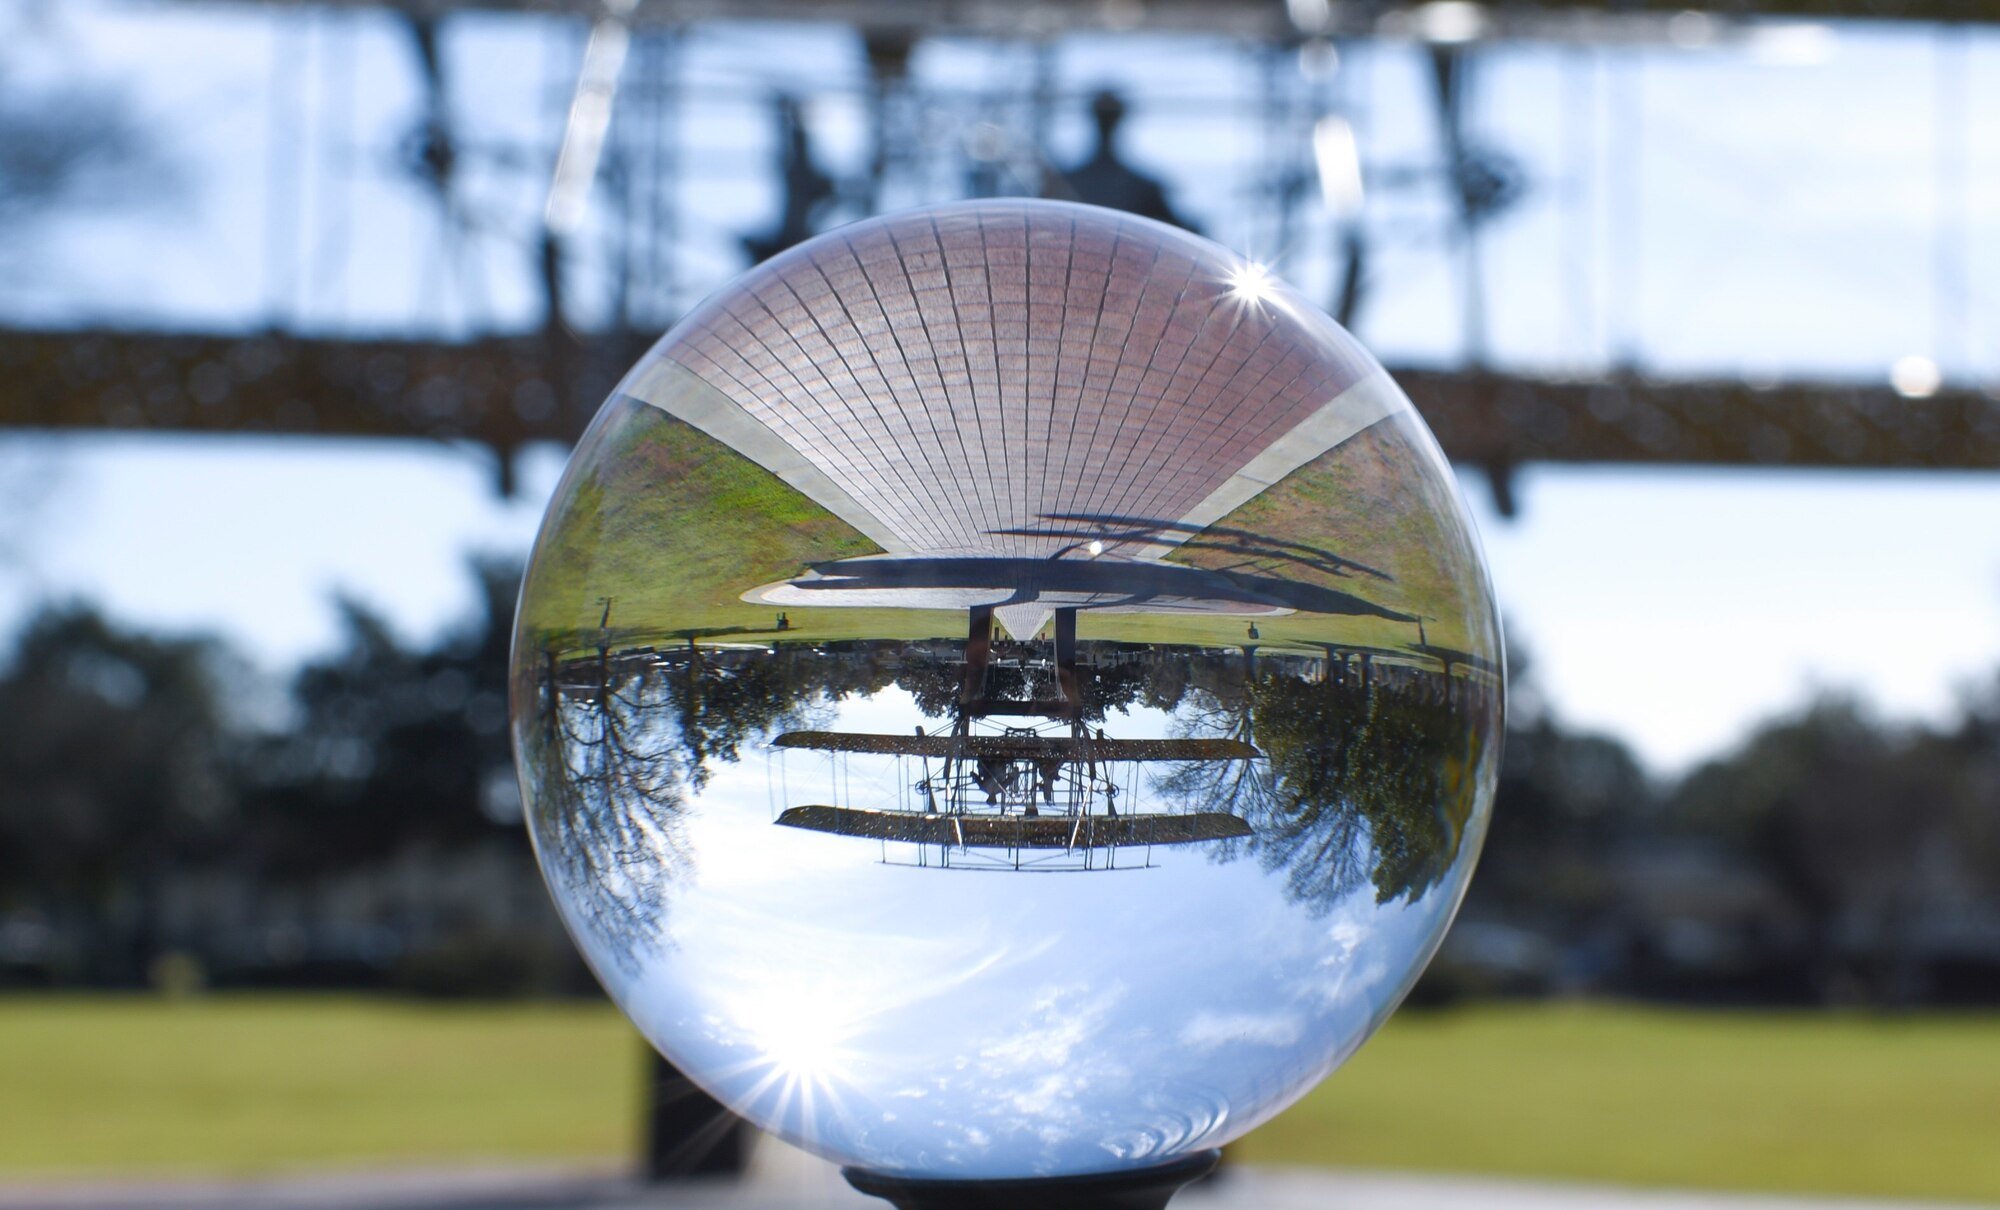 A different perspective of the Wright Flyer static display January 30, 2020, at Maxwell Air Force Base, Alabama.